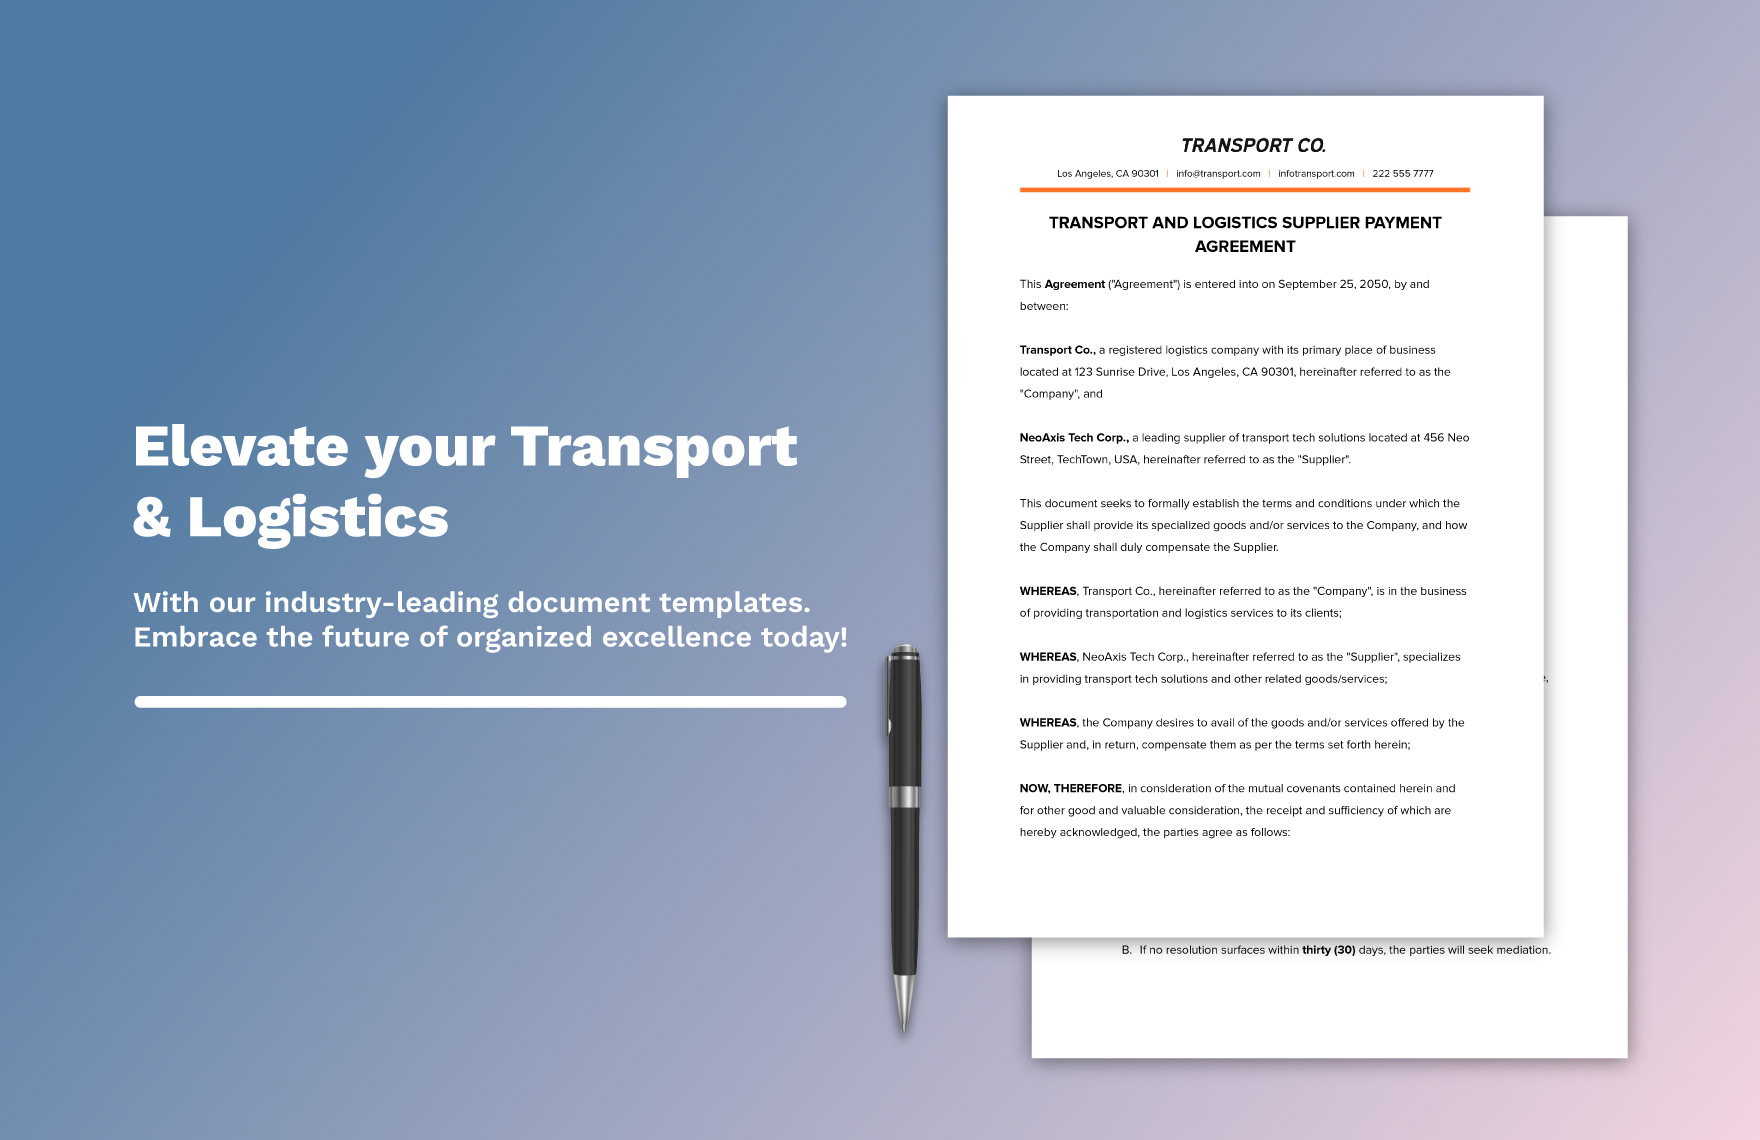 Transport and Logistics Supplier Payment Agreement Template